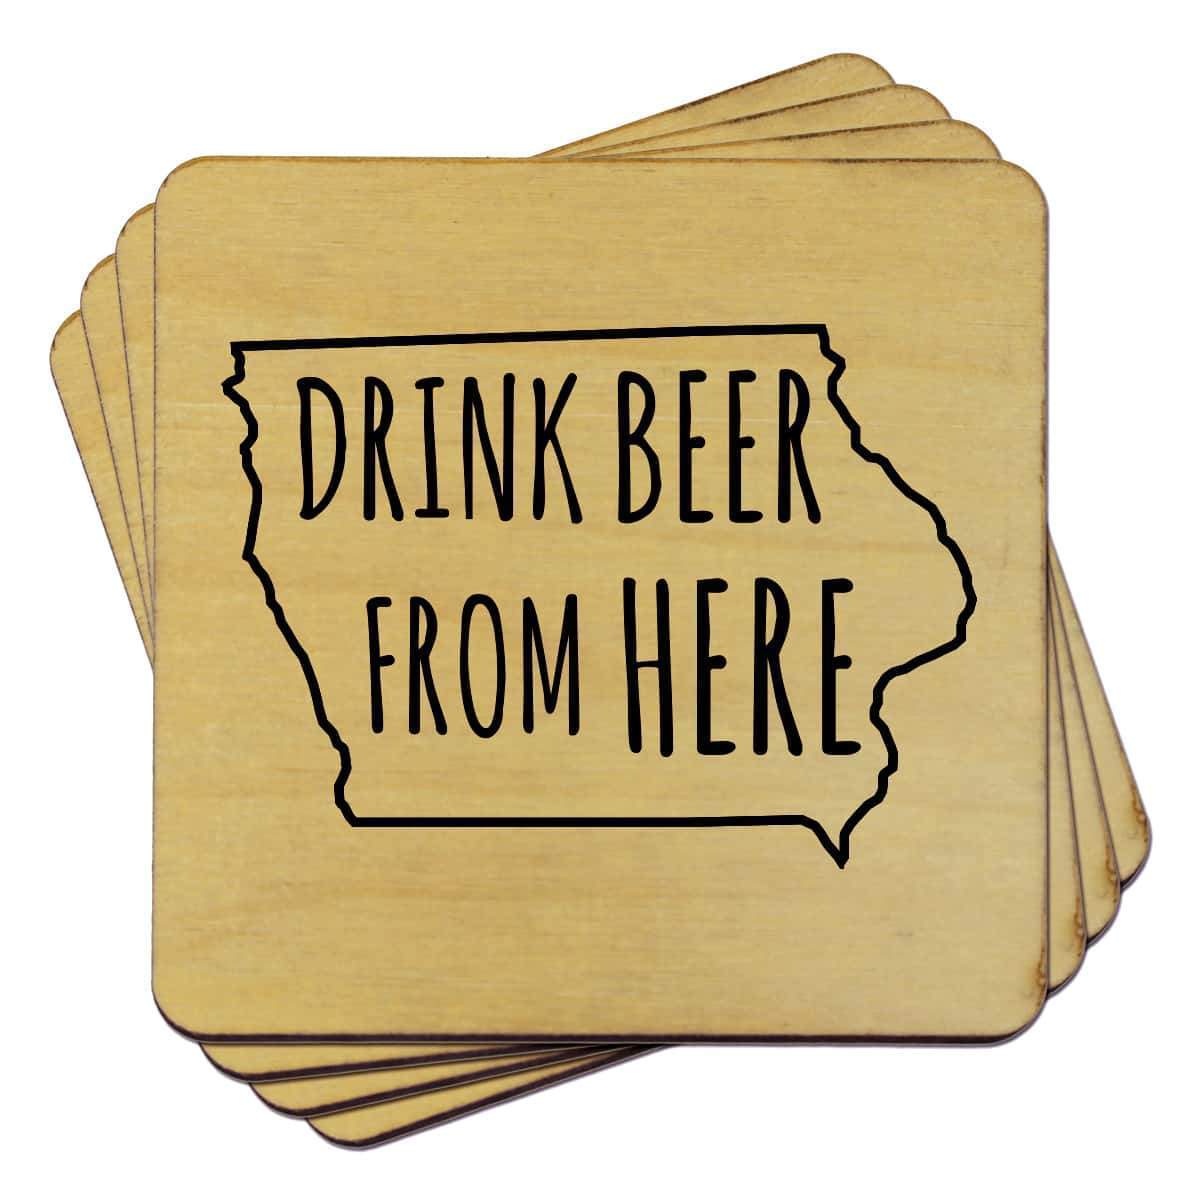 Drink Beer from Here Coasters- IOWA (Set of 4)